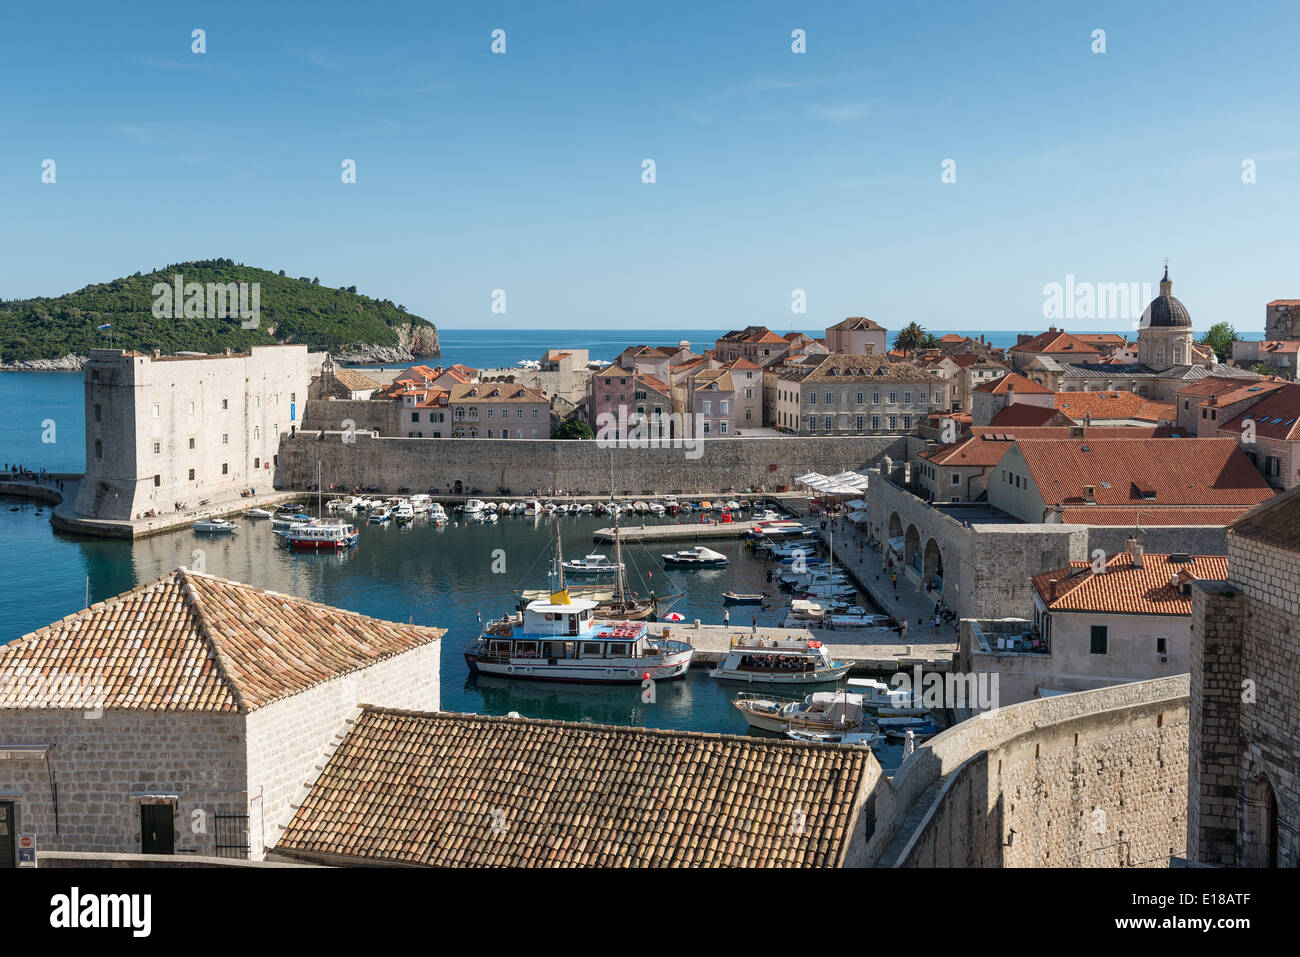 View across the harbour at St John's Fort with boats in the foreground and the walls to the old town in view, Dubrovnik, Croatia Stock Photo